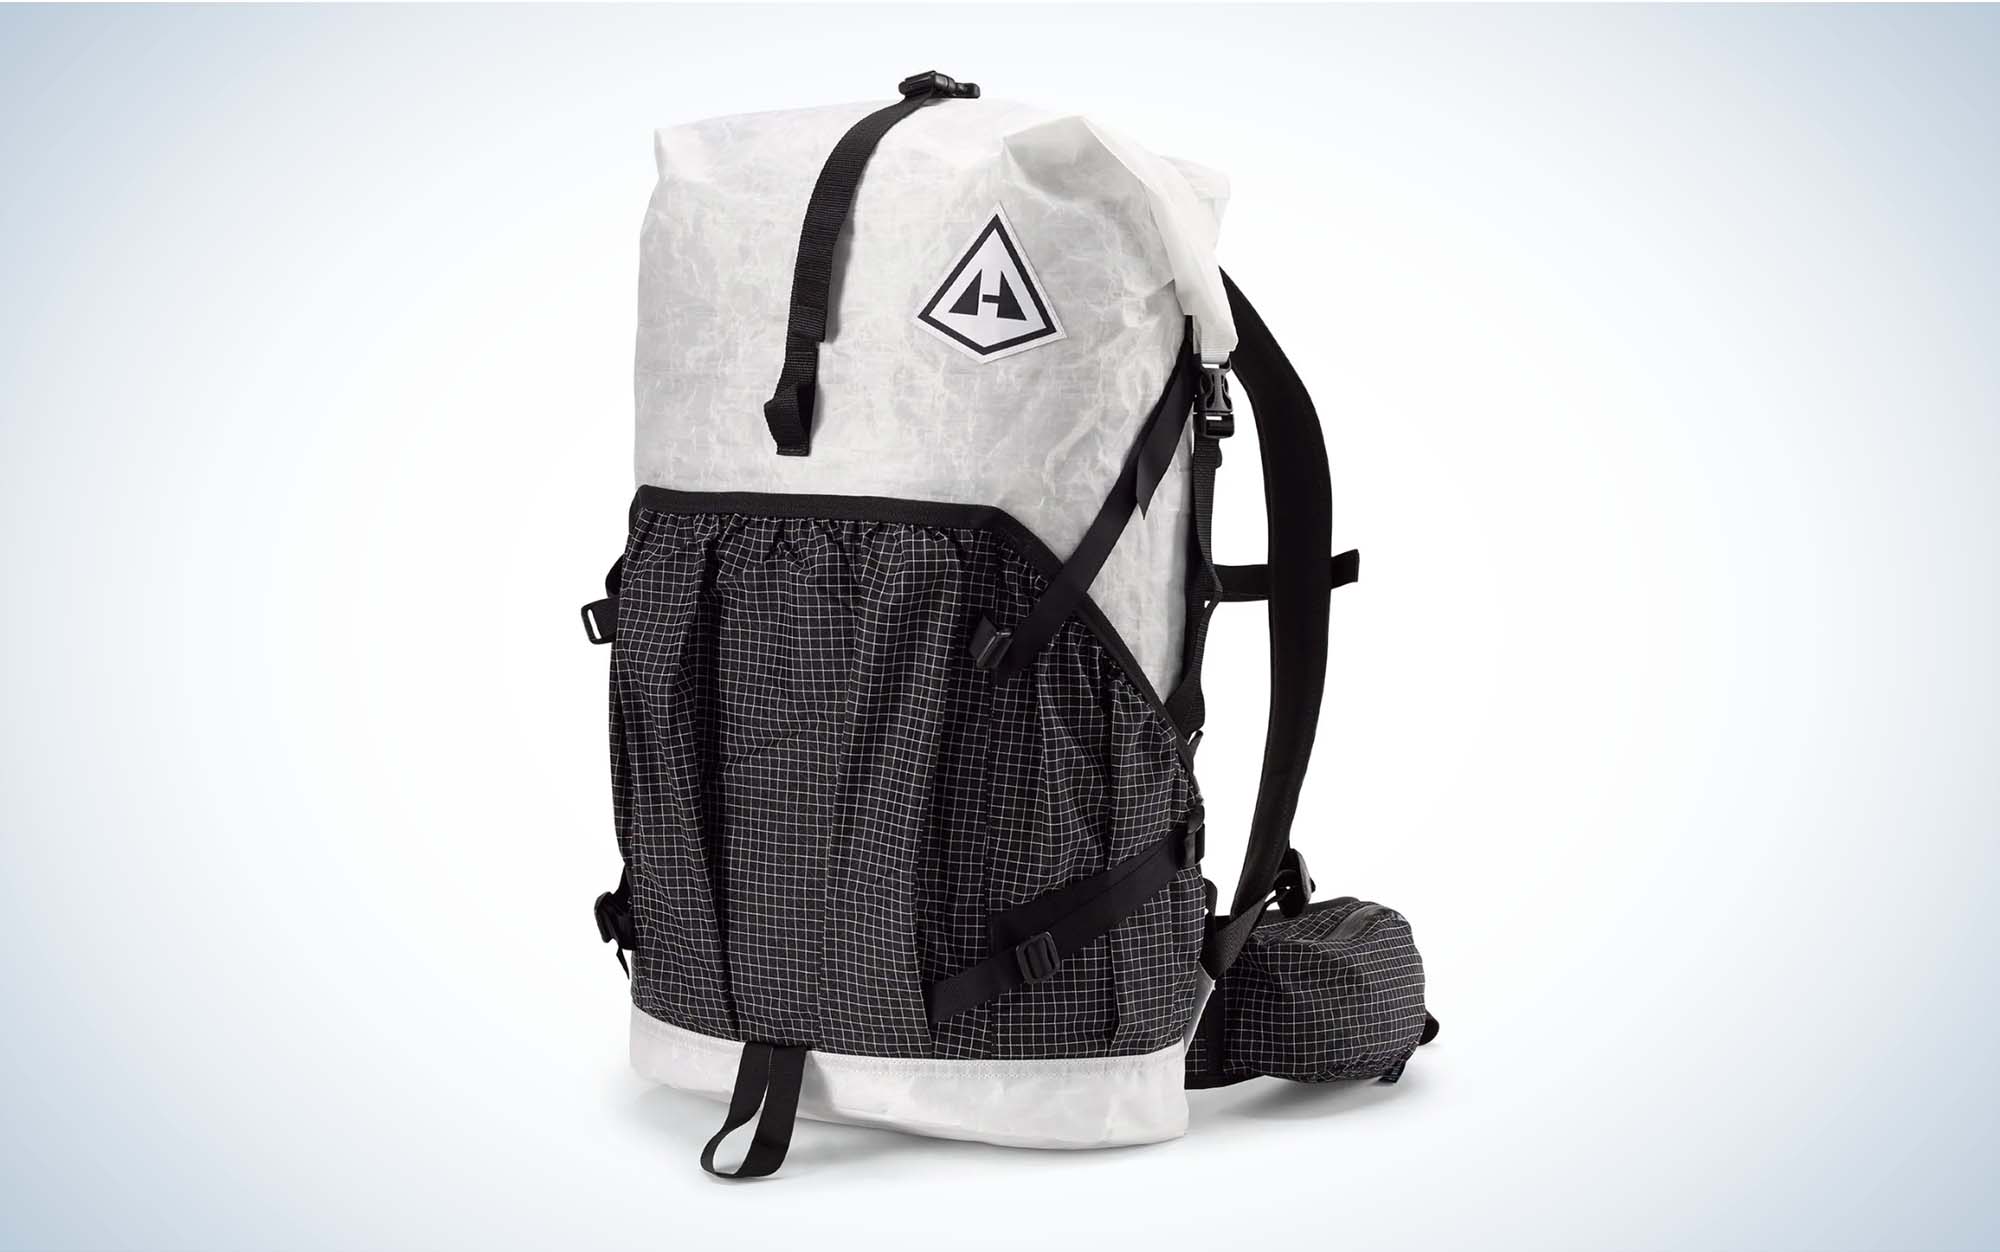 The best ultralight backpack you can easily find in stores.